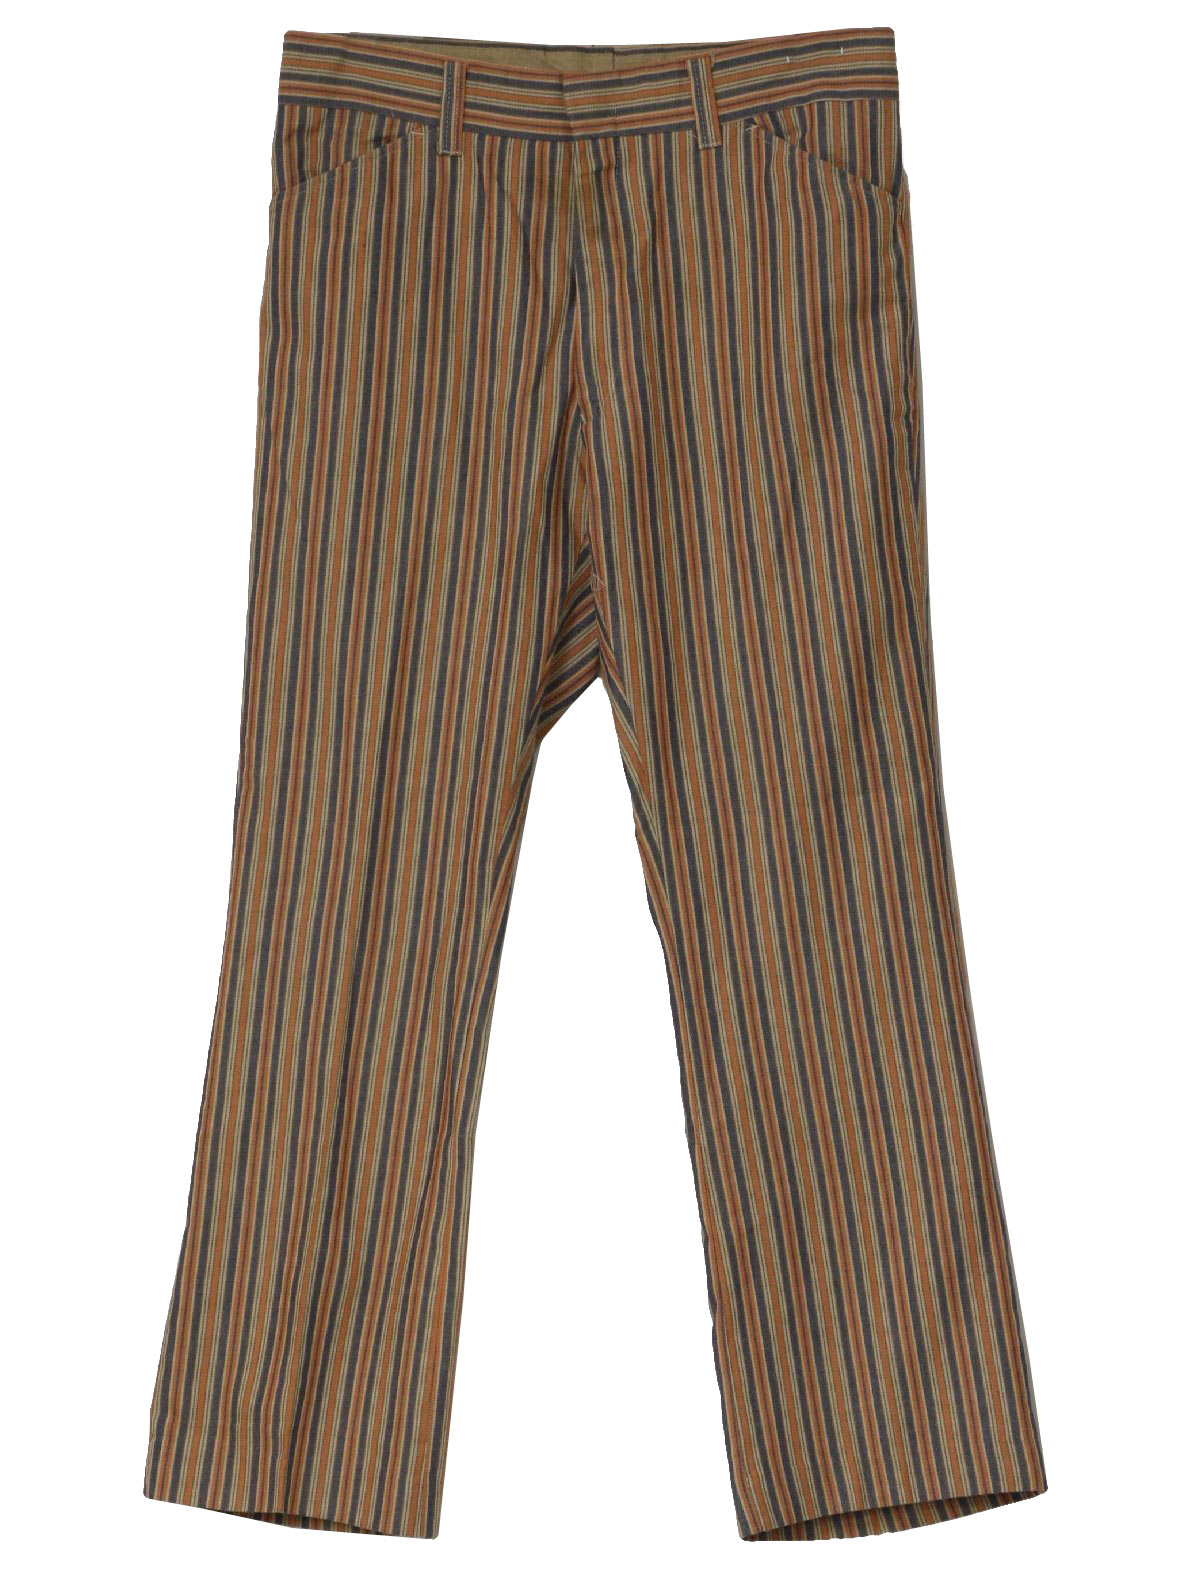 Buy THE BEAR HOUSE Men Brown Vertical Striped Tapered Fit Casual Trouser  online